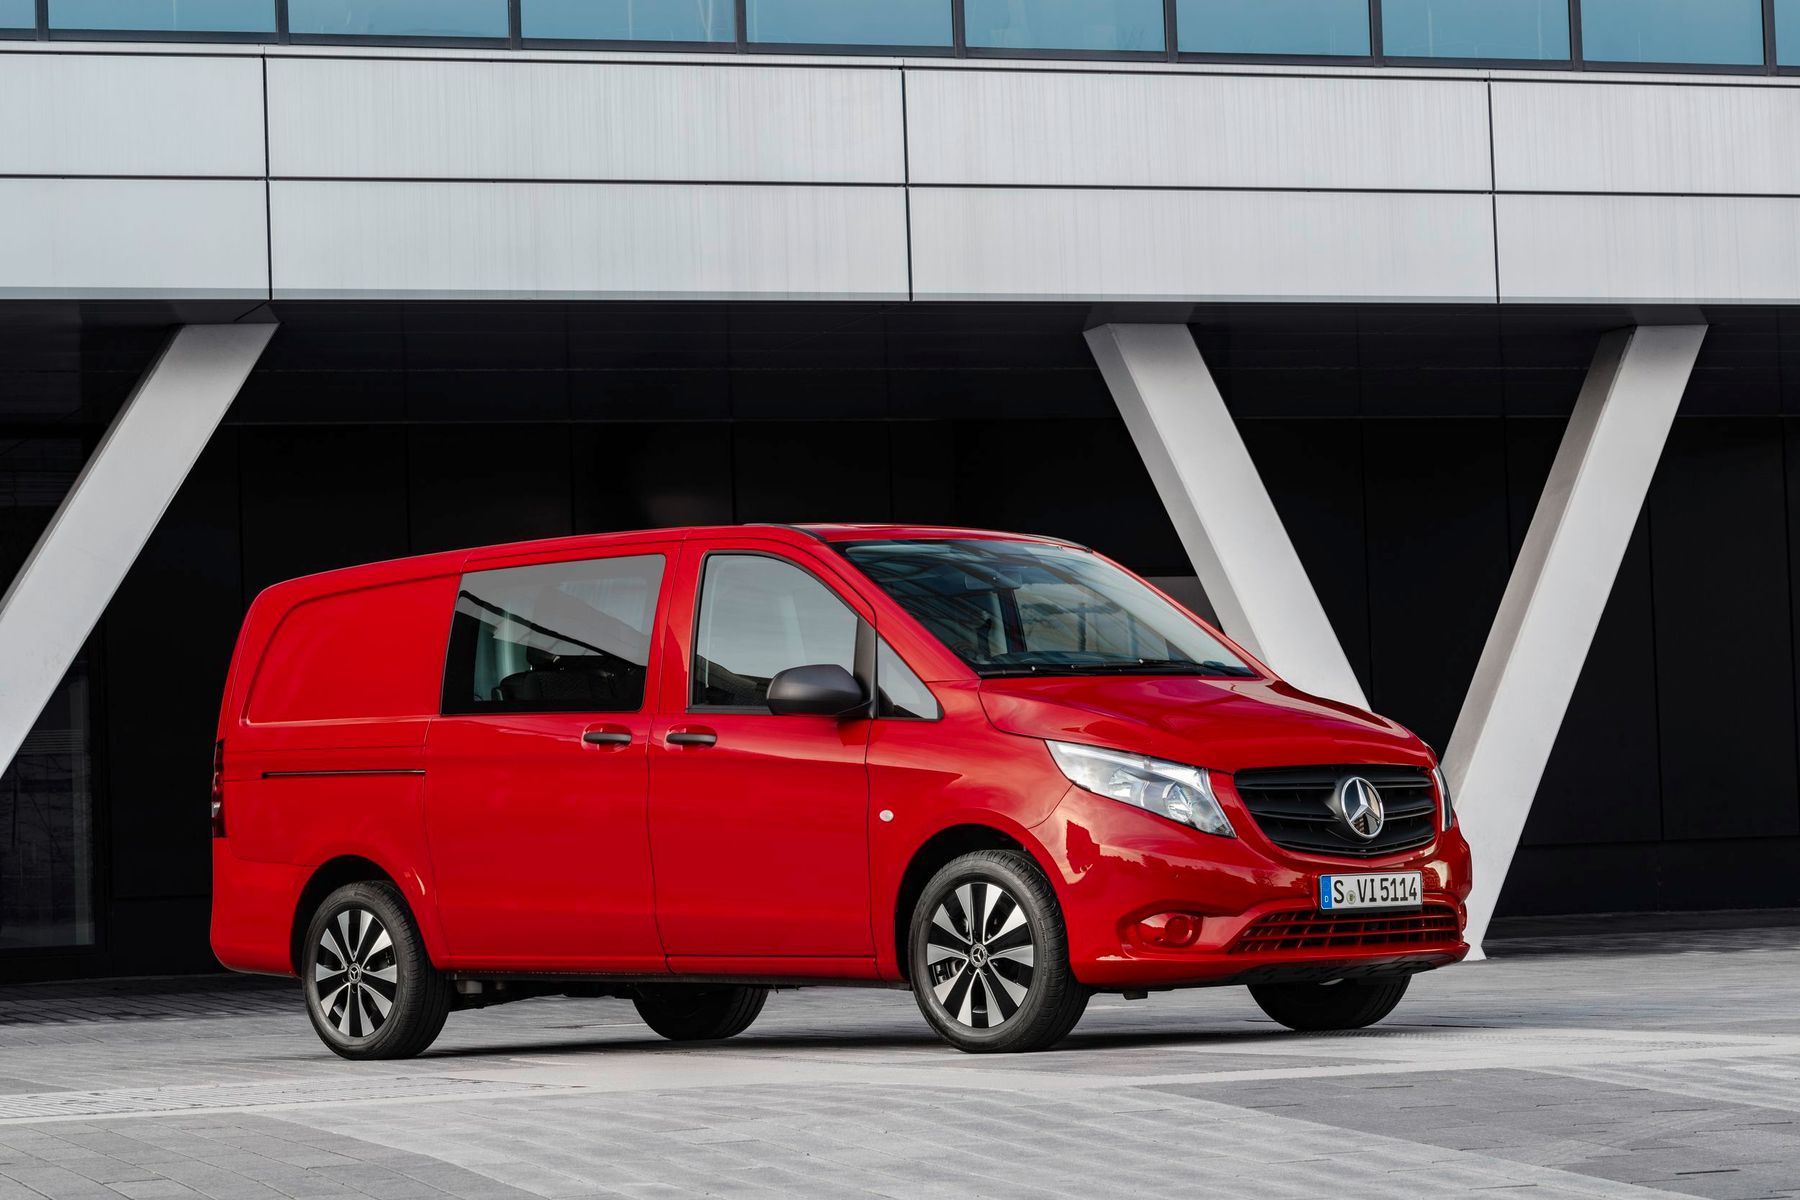 Mercedes-Benz Vito. 3rd generation, 2020 restyling —